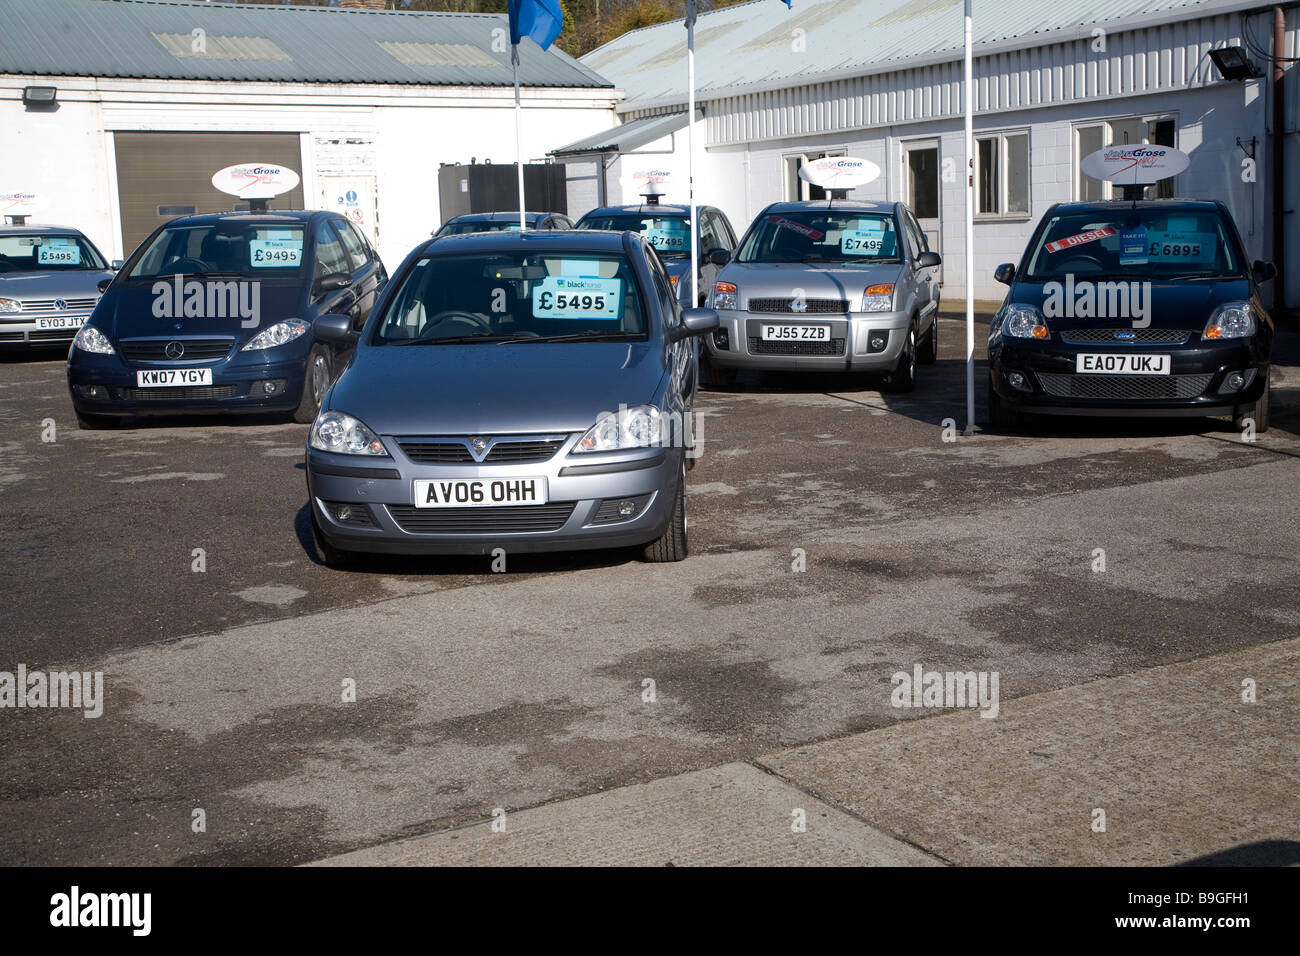 Second hand used cars for sale on garage forecourt Stock Photo